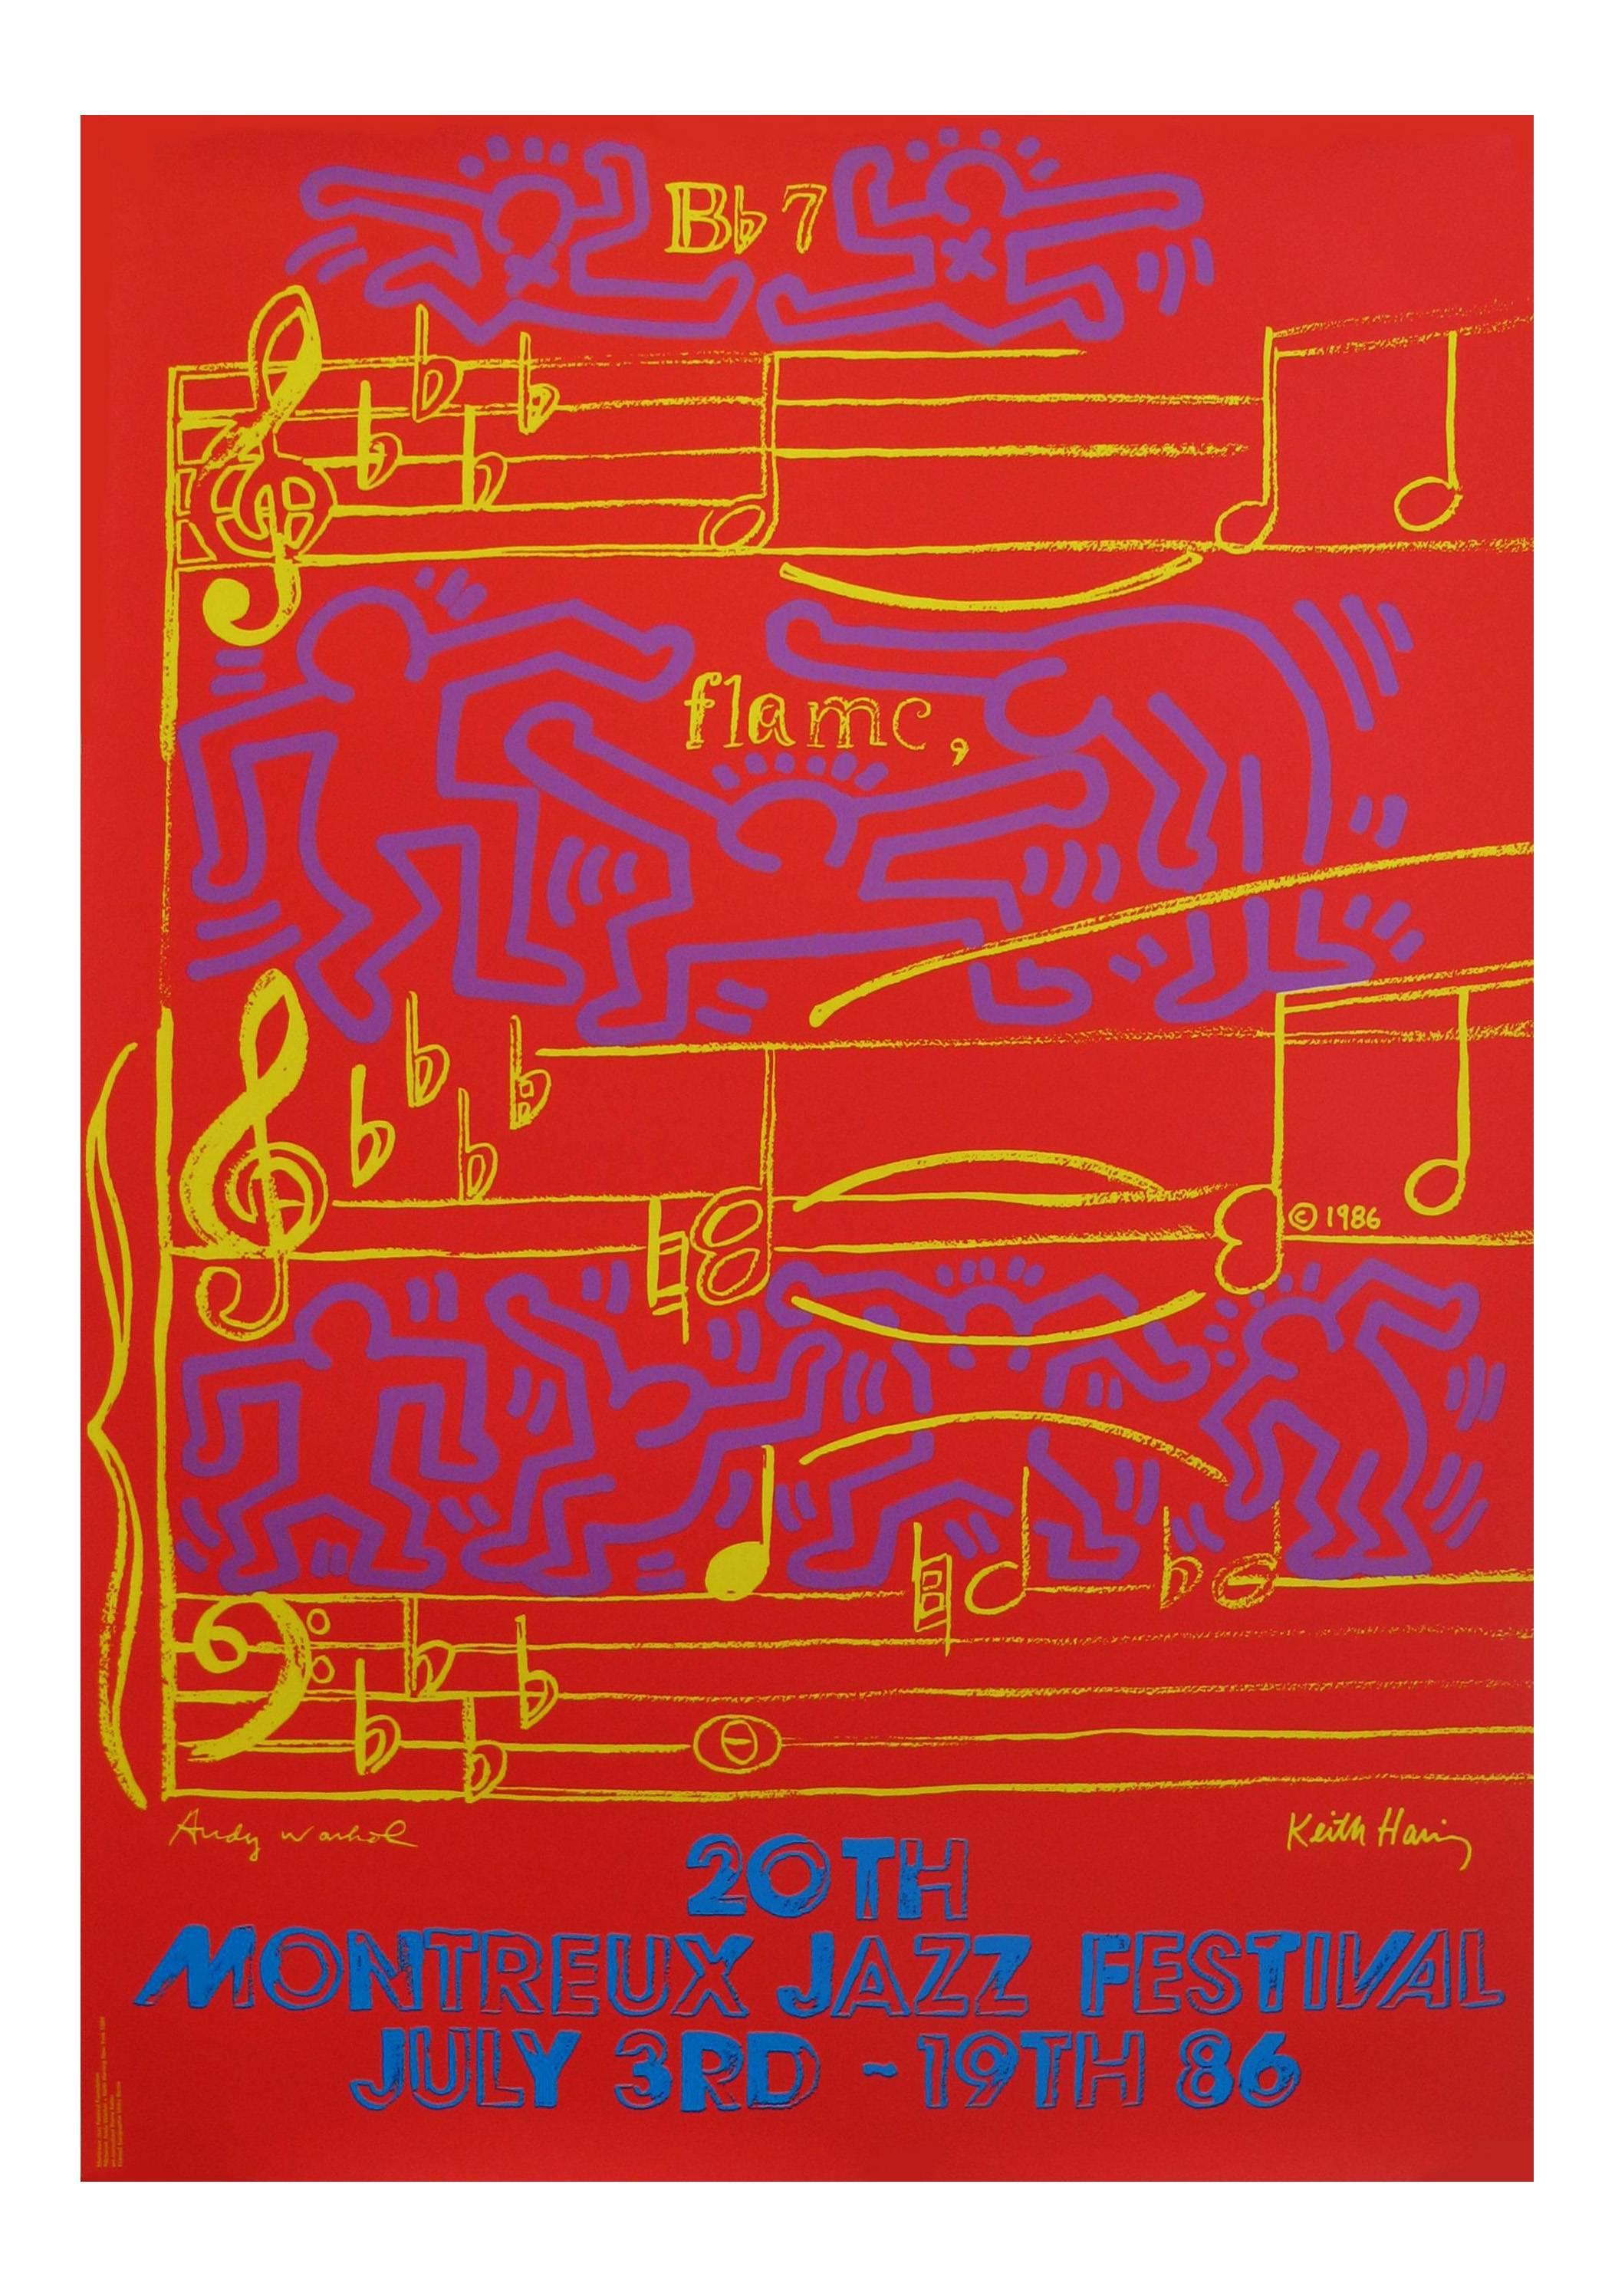 Andy Warhol, Keith Haring Montreux Jazz poster 1986 2